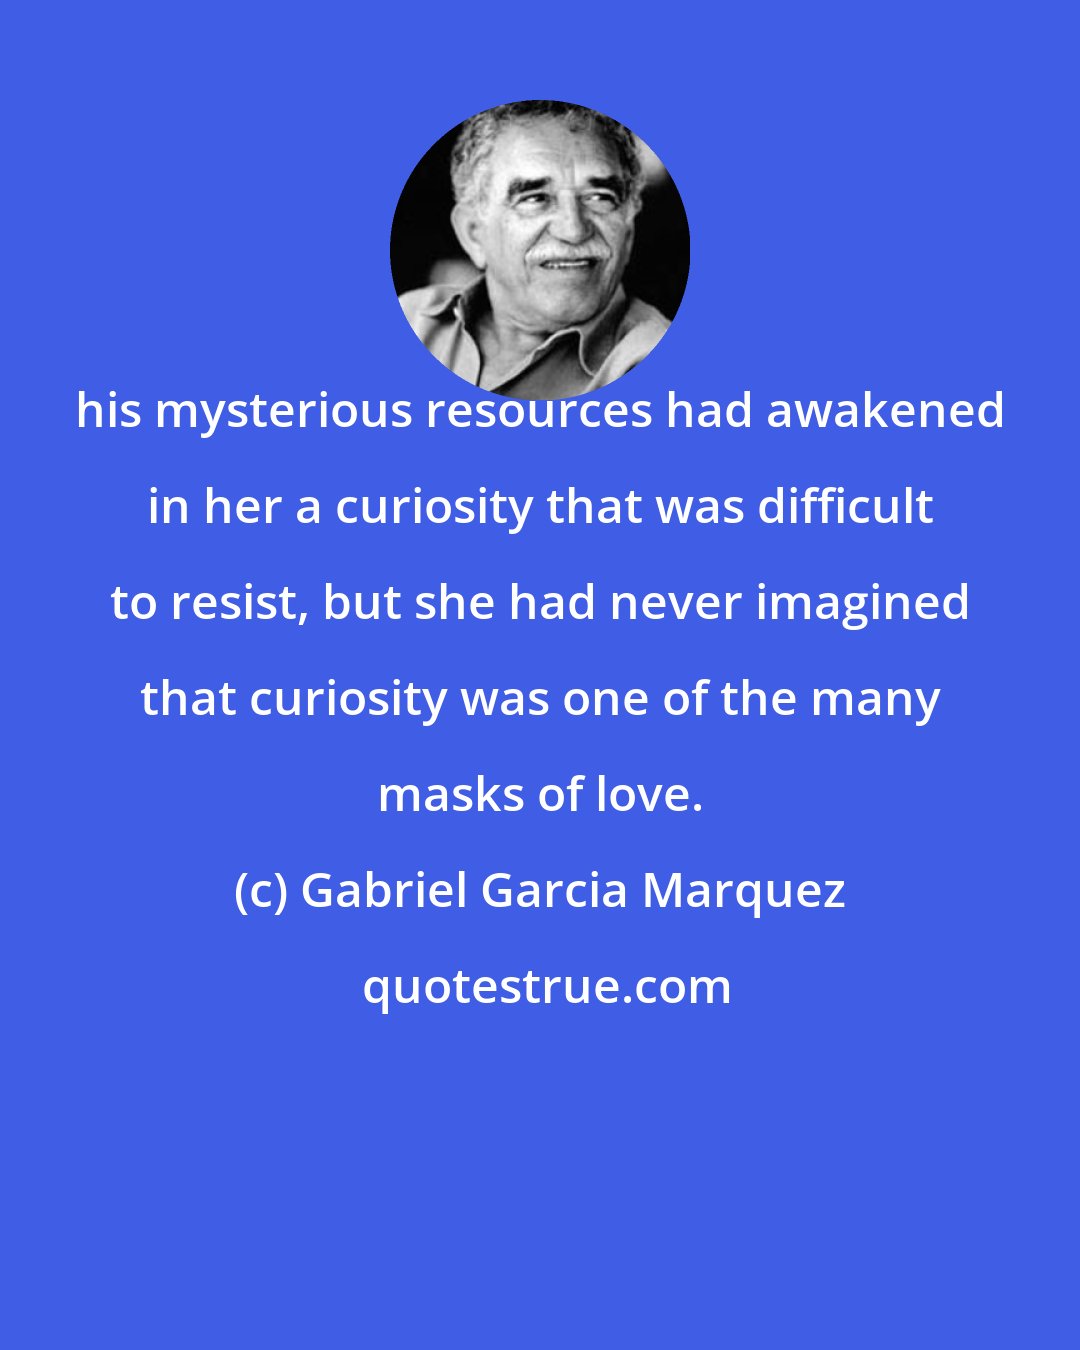 Gabriel Garcia Marquez: his mysterious resources had awakened in her a curiosity that was difficult to resist, but she had never imagined that curiosity was one of the many masks of love.